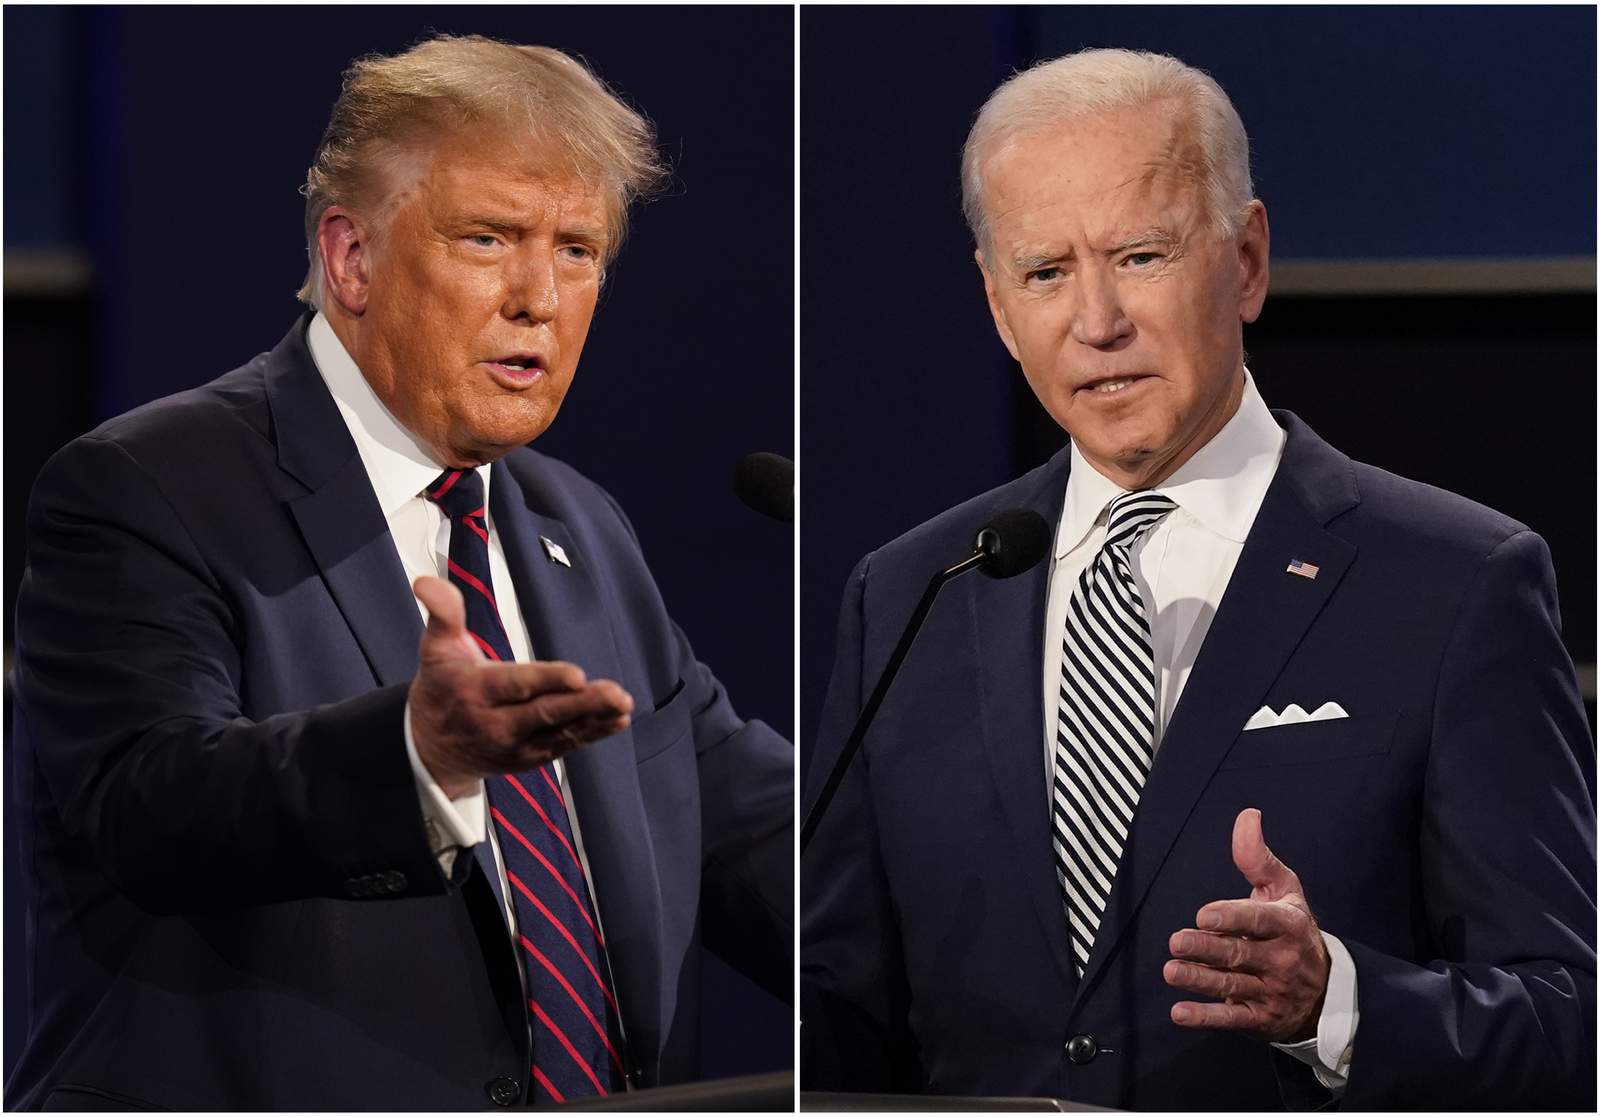 Where do Trump and Biden stand on health care issue?